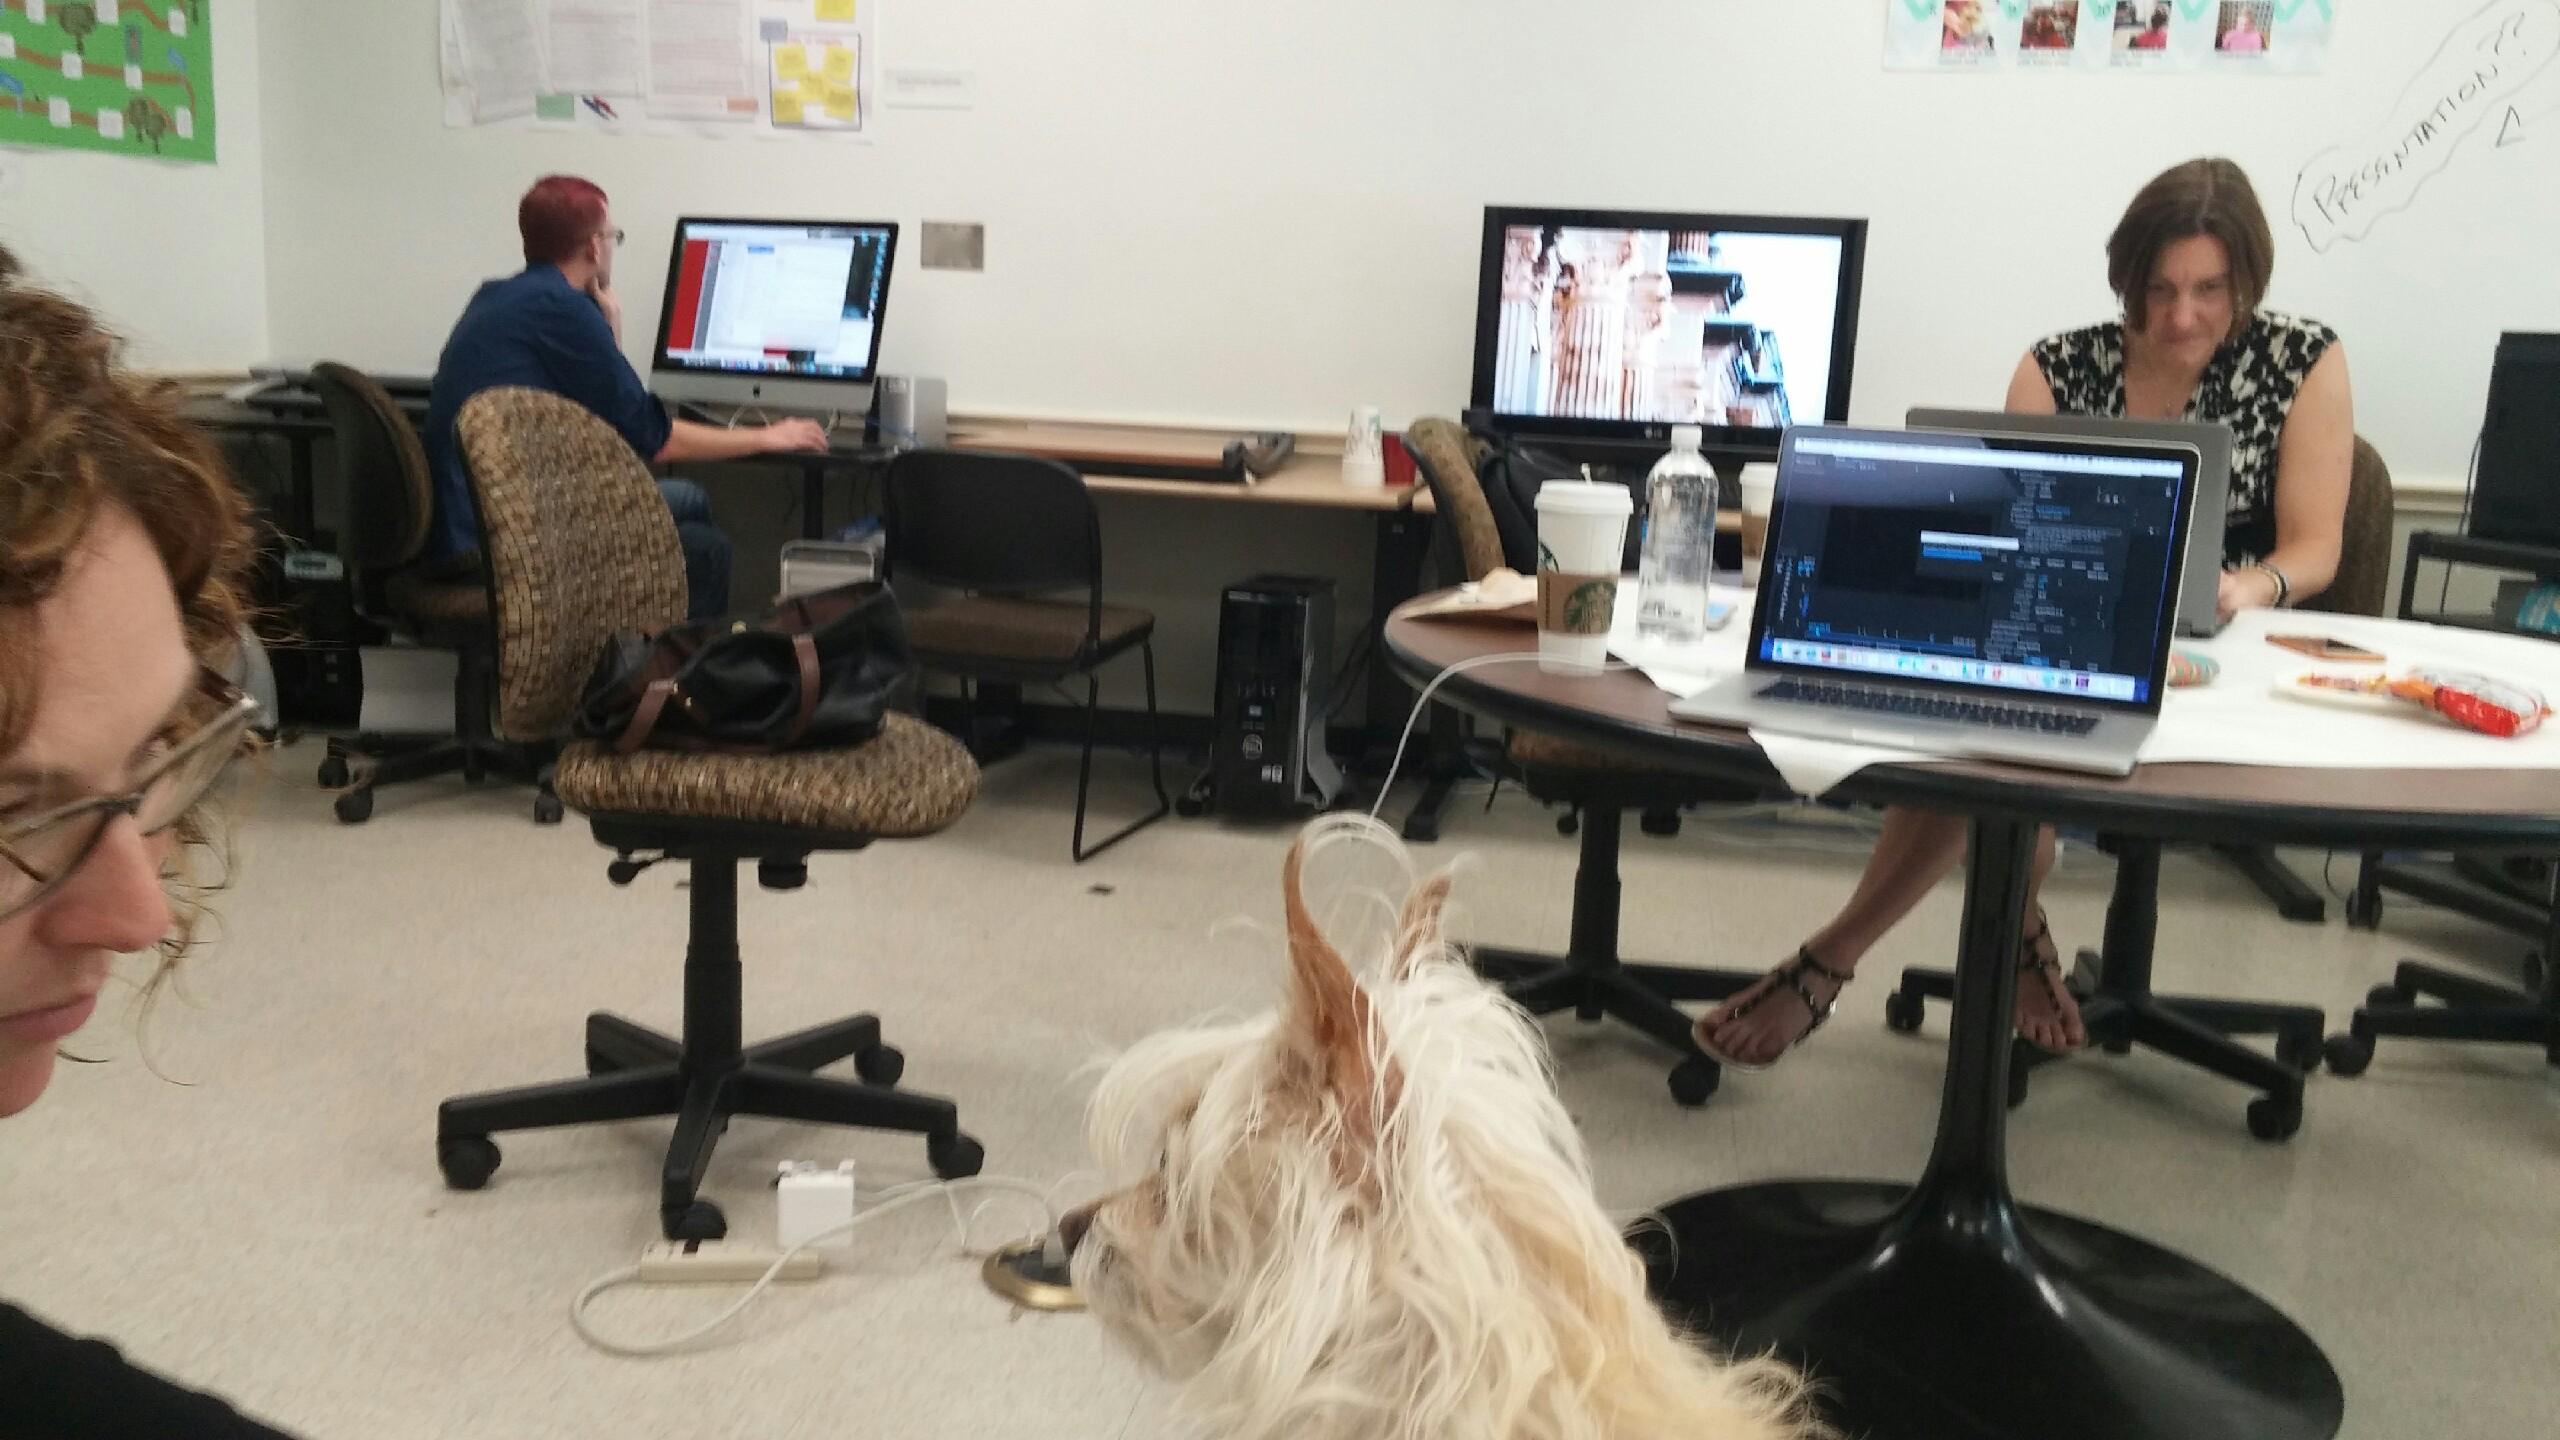 in the foreground is a portion of Erica's face looking at Charlie, a small white dog; in the background is Sarah working on a laptop at a circular table and Michael working on an iMac with his back facing the camera.